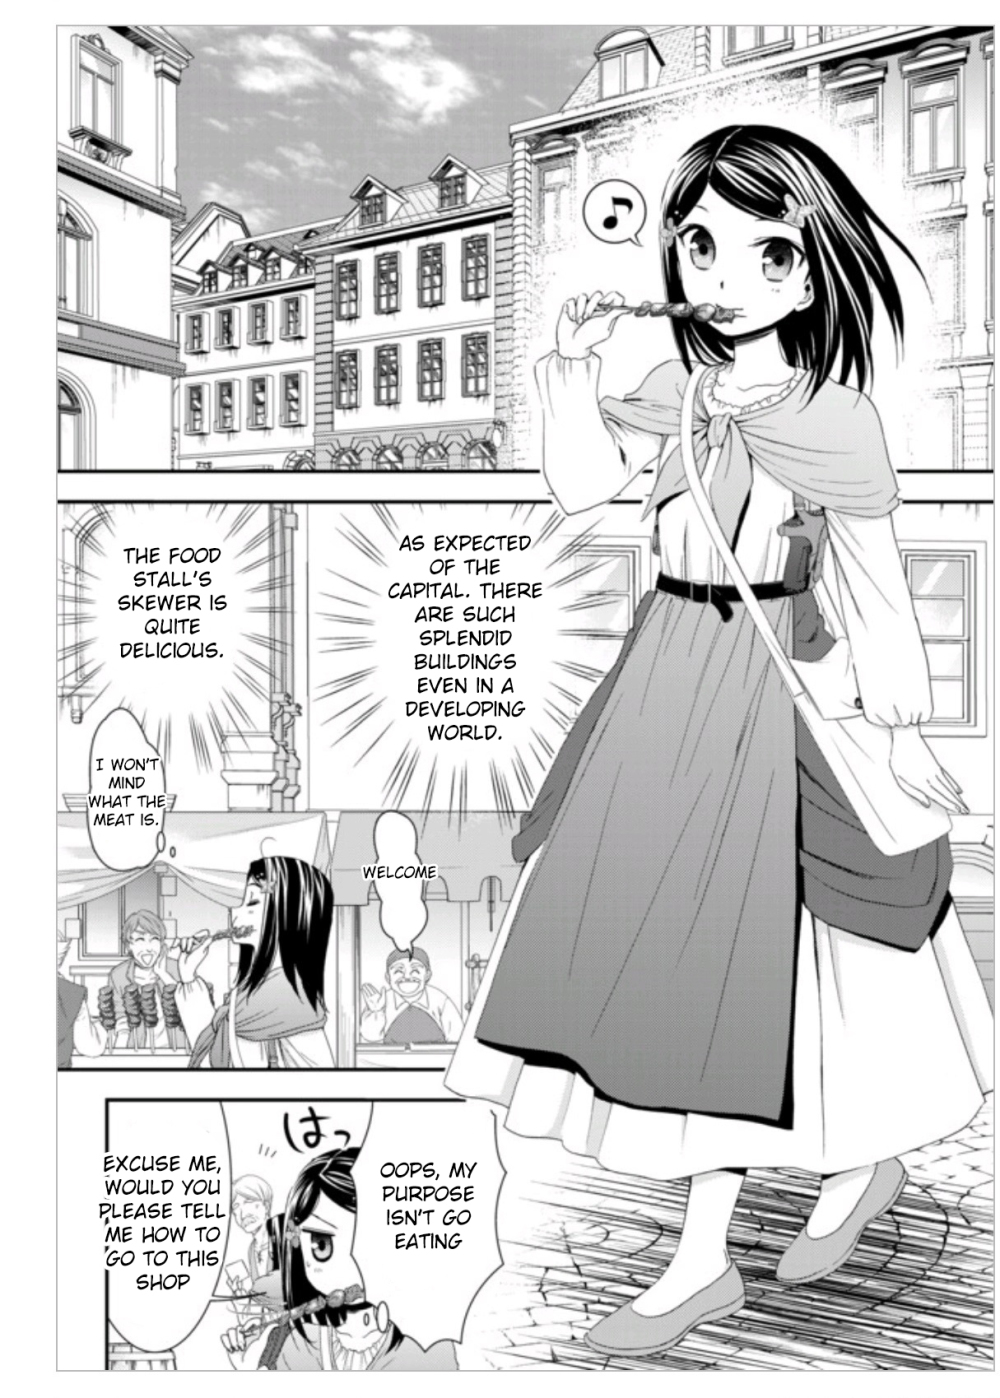 Saving 80,000 Gold Coins in the Different World for My Old Age Vol. 1 Ch. 8